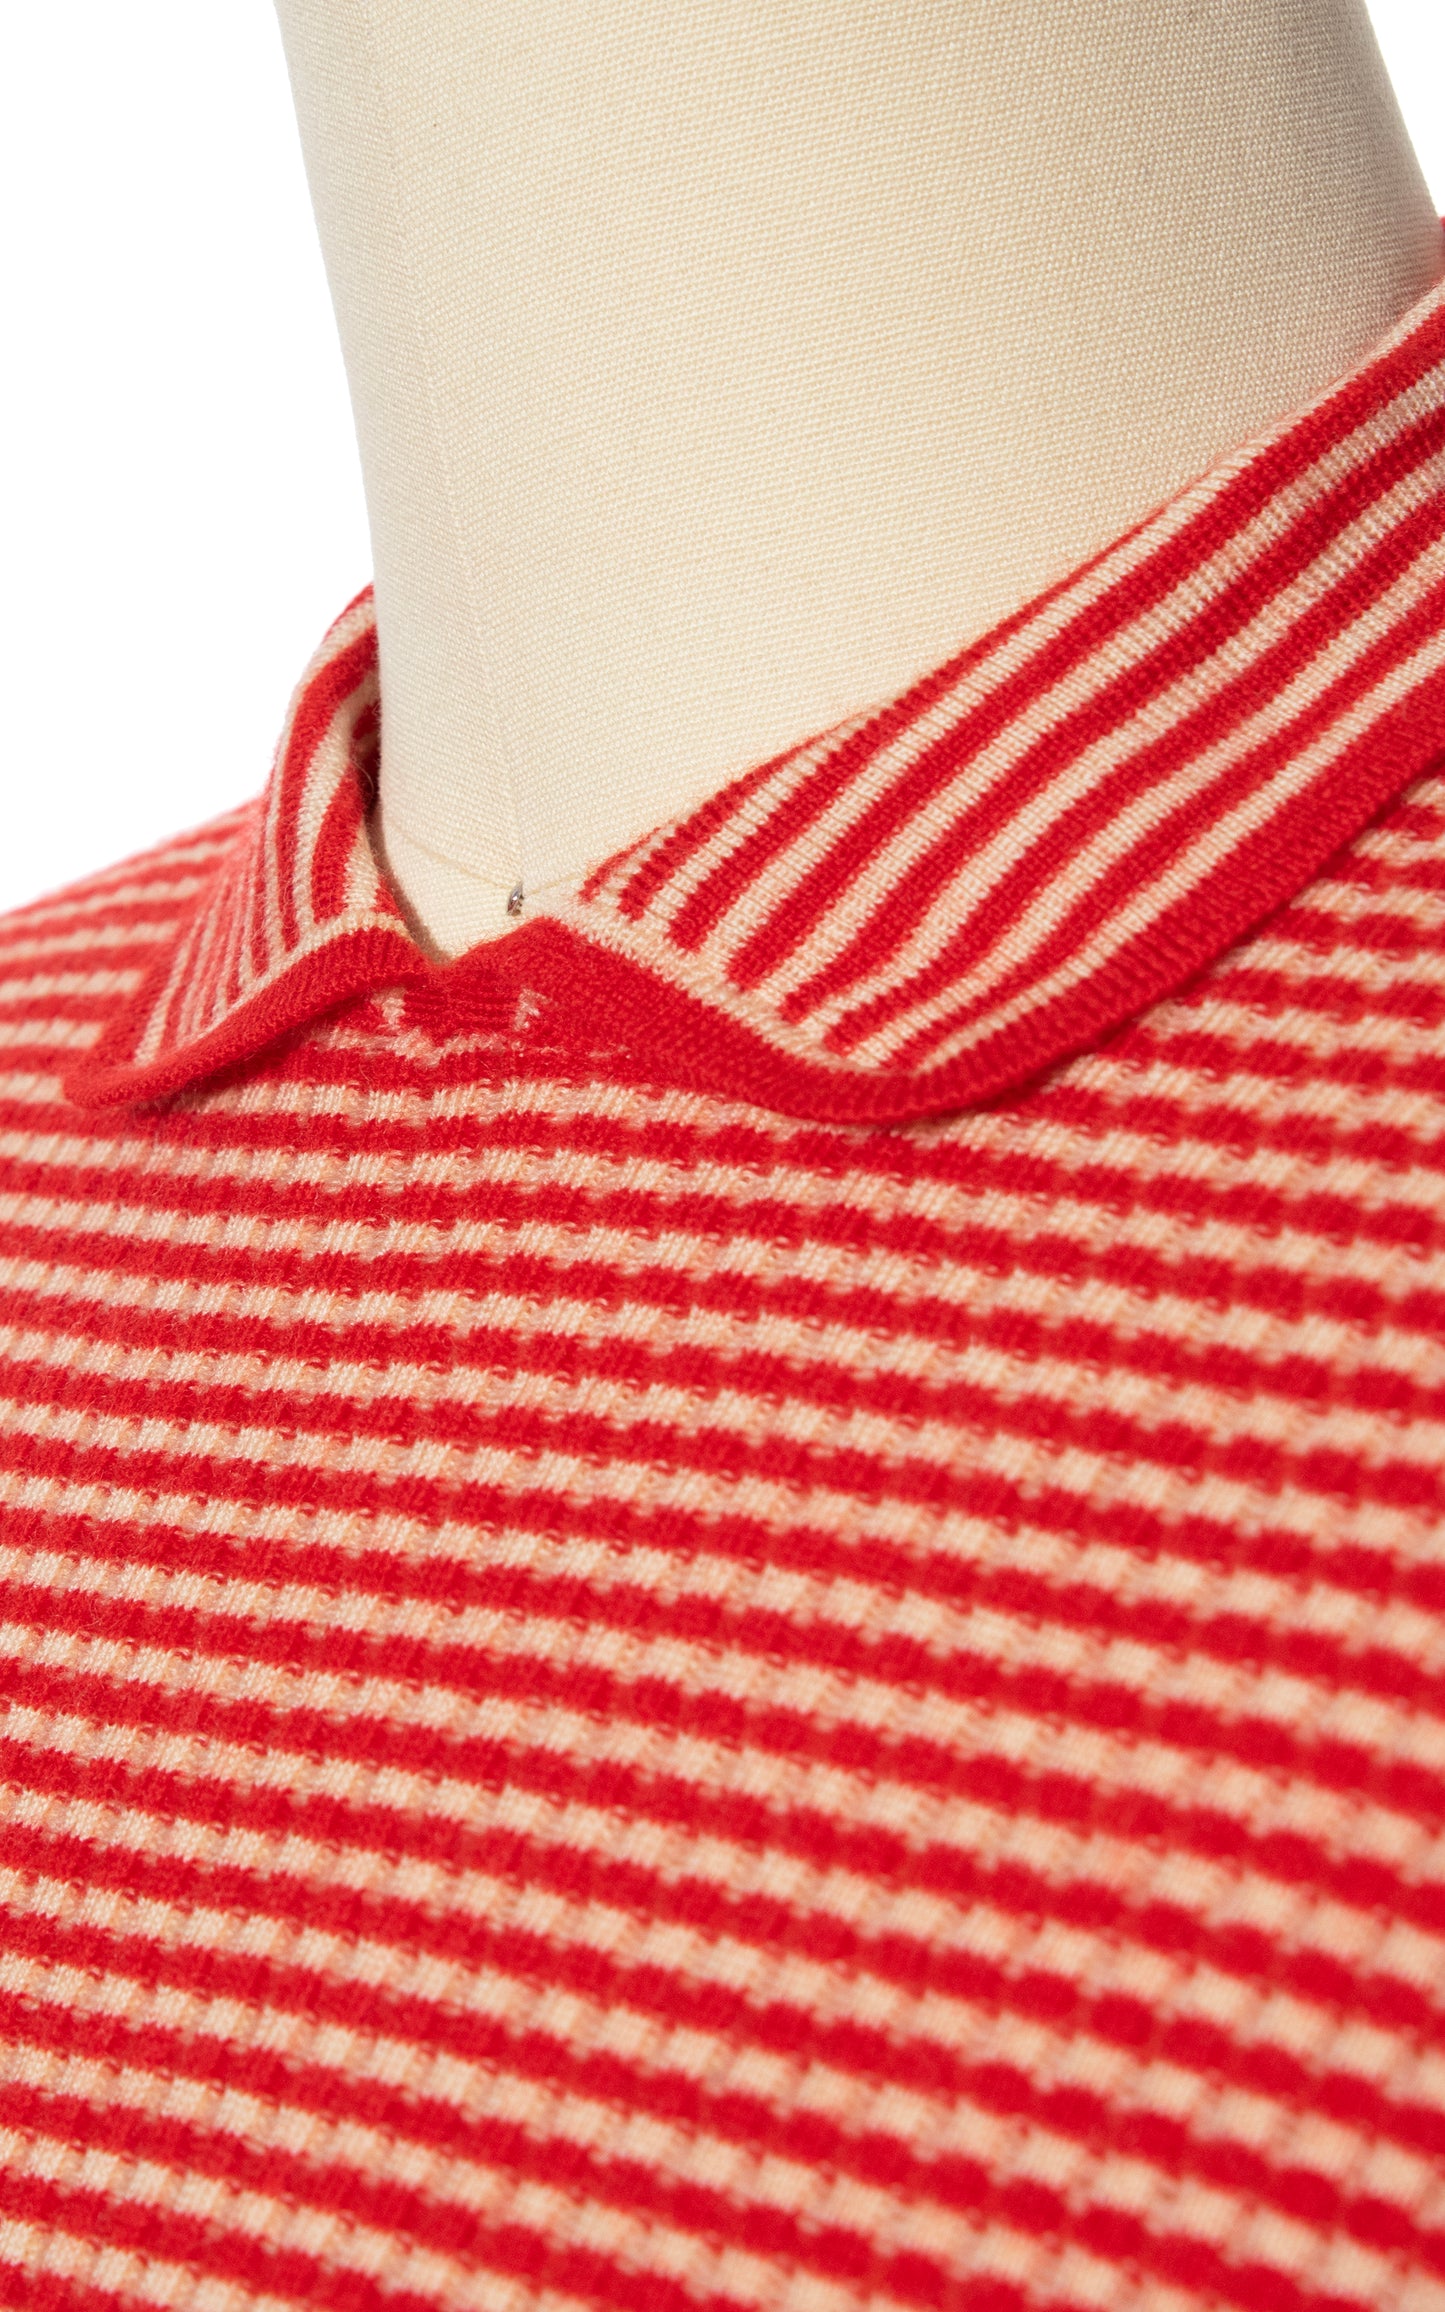 Vintage 50s 60s 1950s 1960s Red White Candycane Striped Wool Sweater Top Peter Pan Collar BirthdayLifeVintage